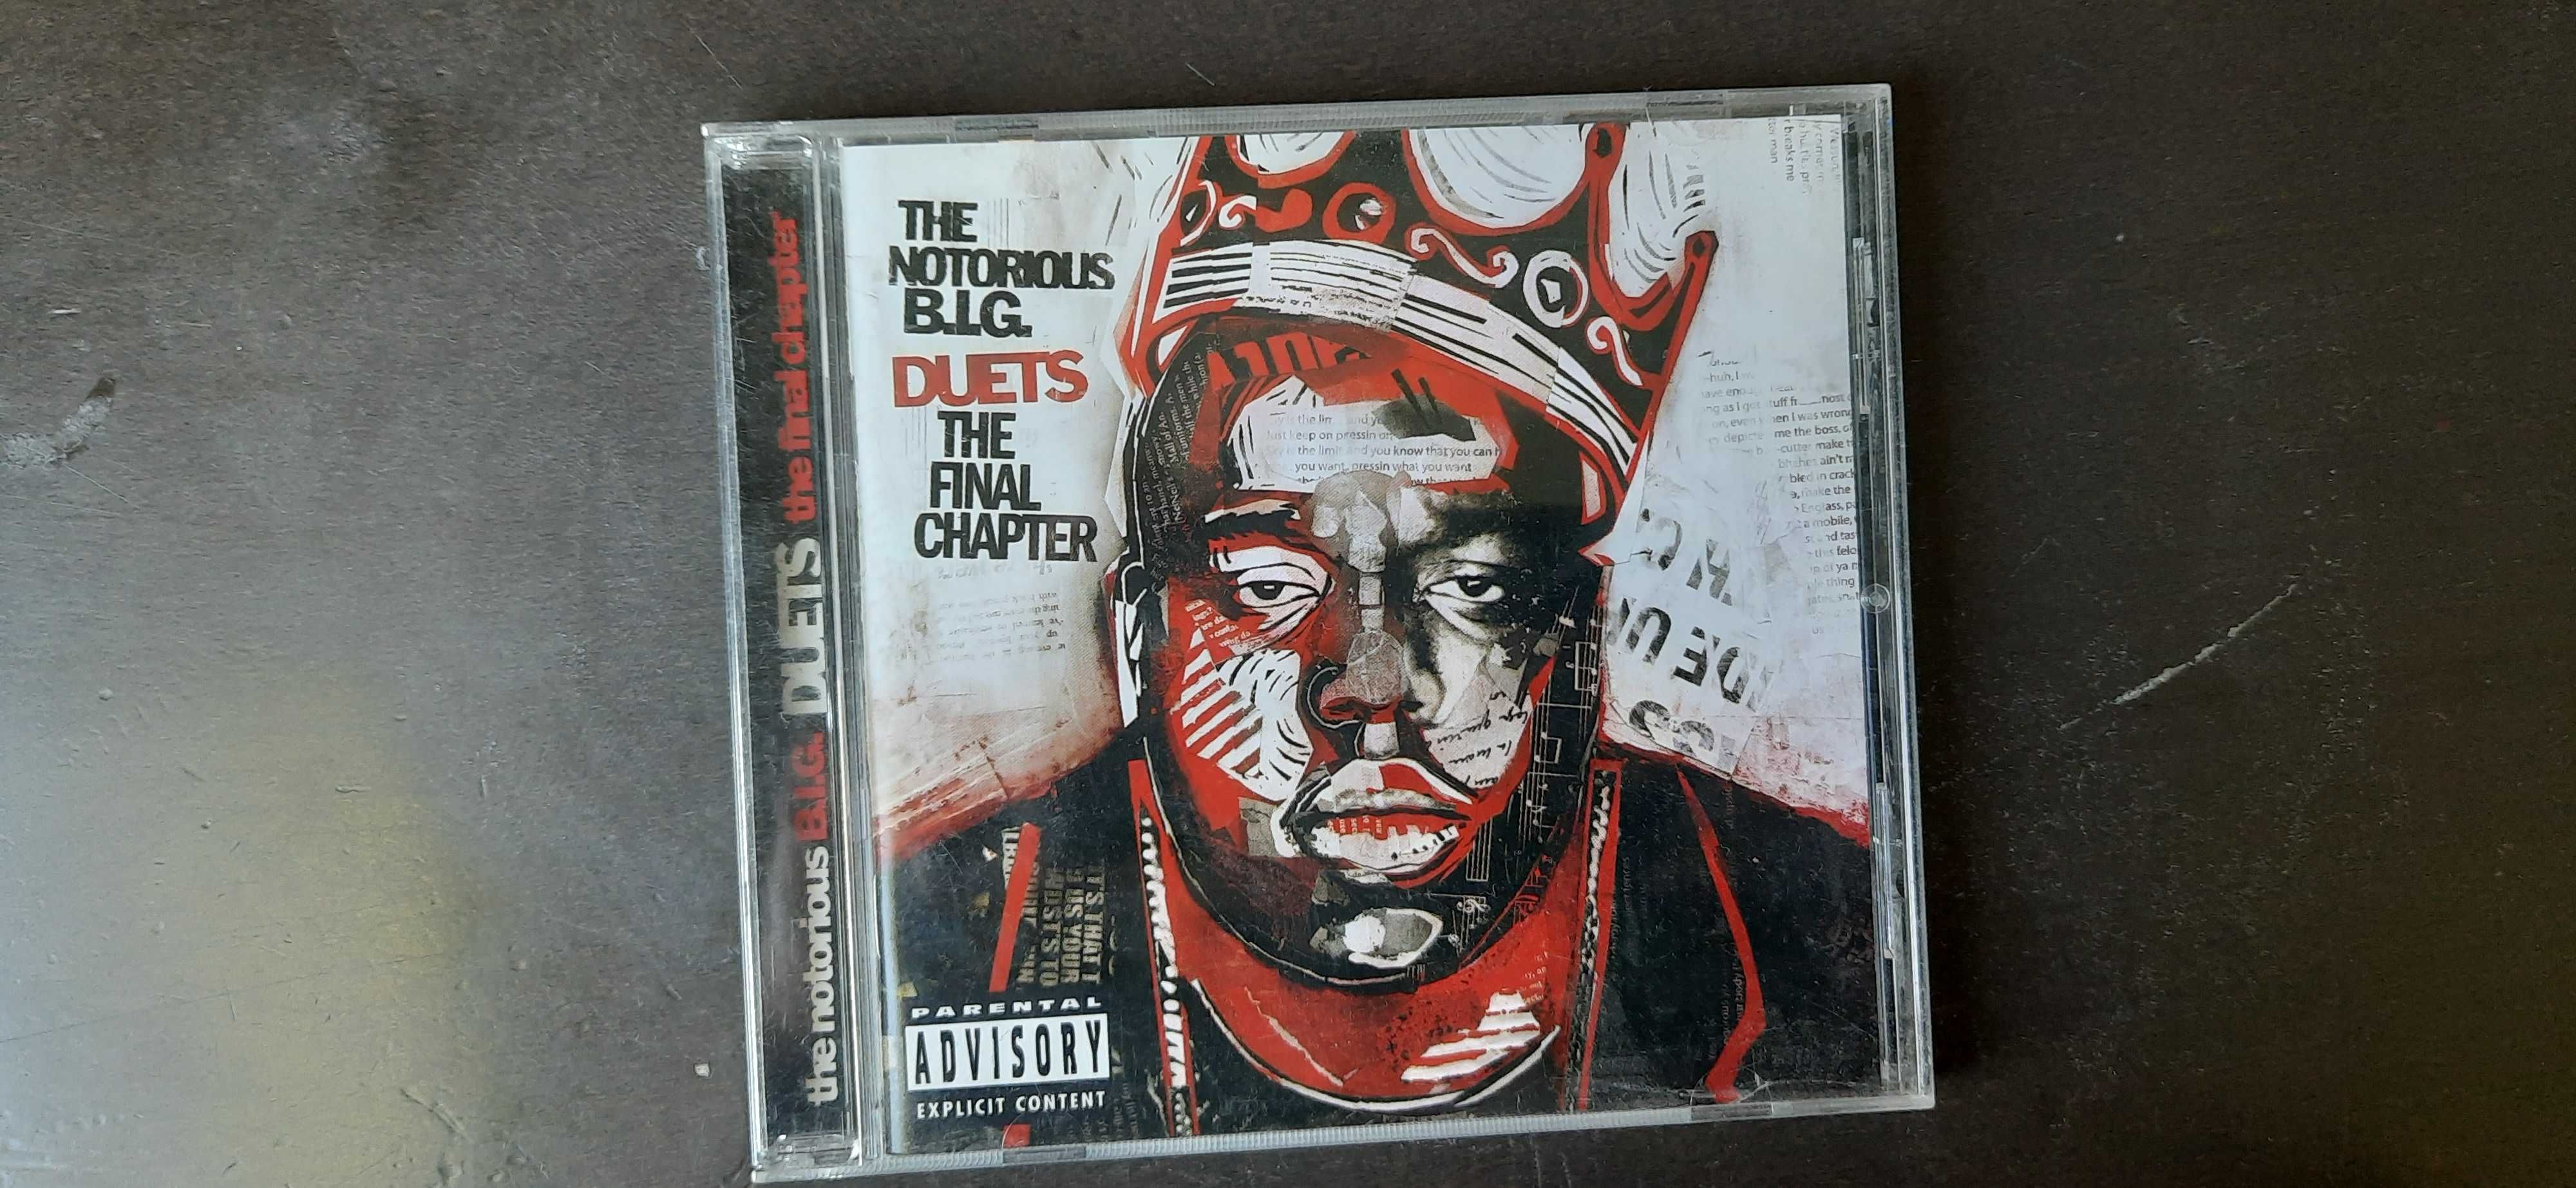 The Notorious B.I.G.* - Duets (The Final Chapter)
CD